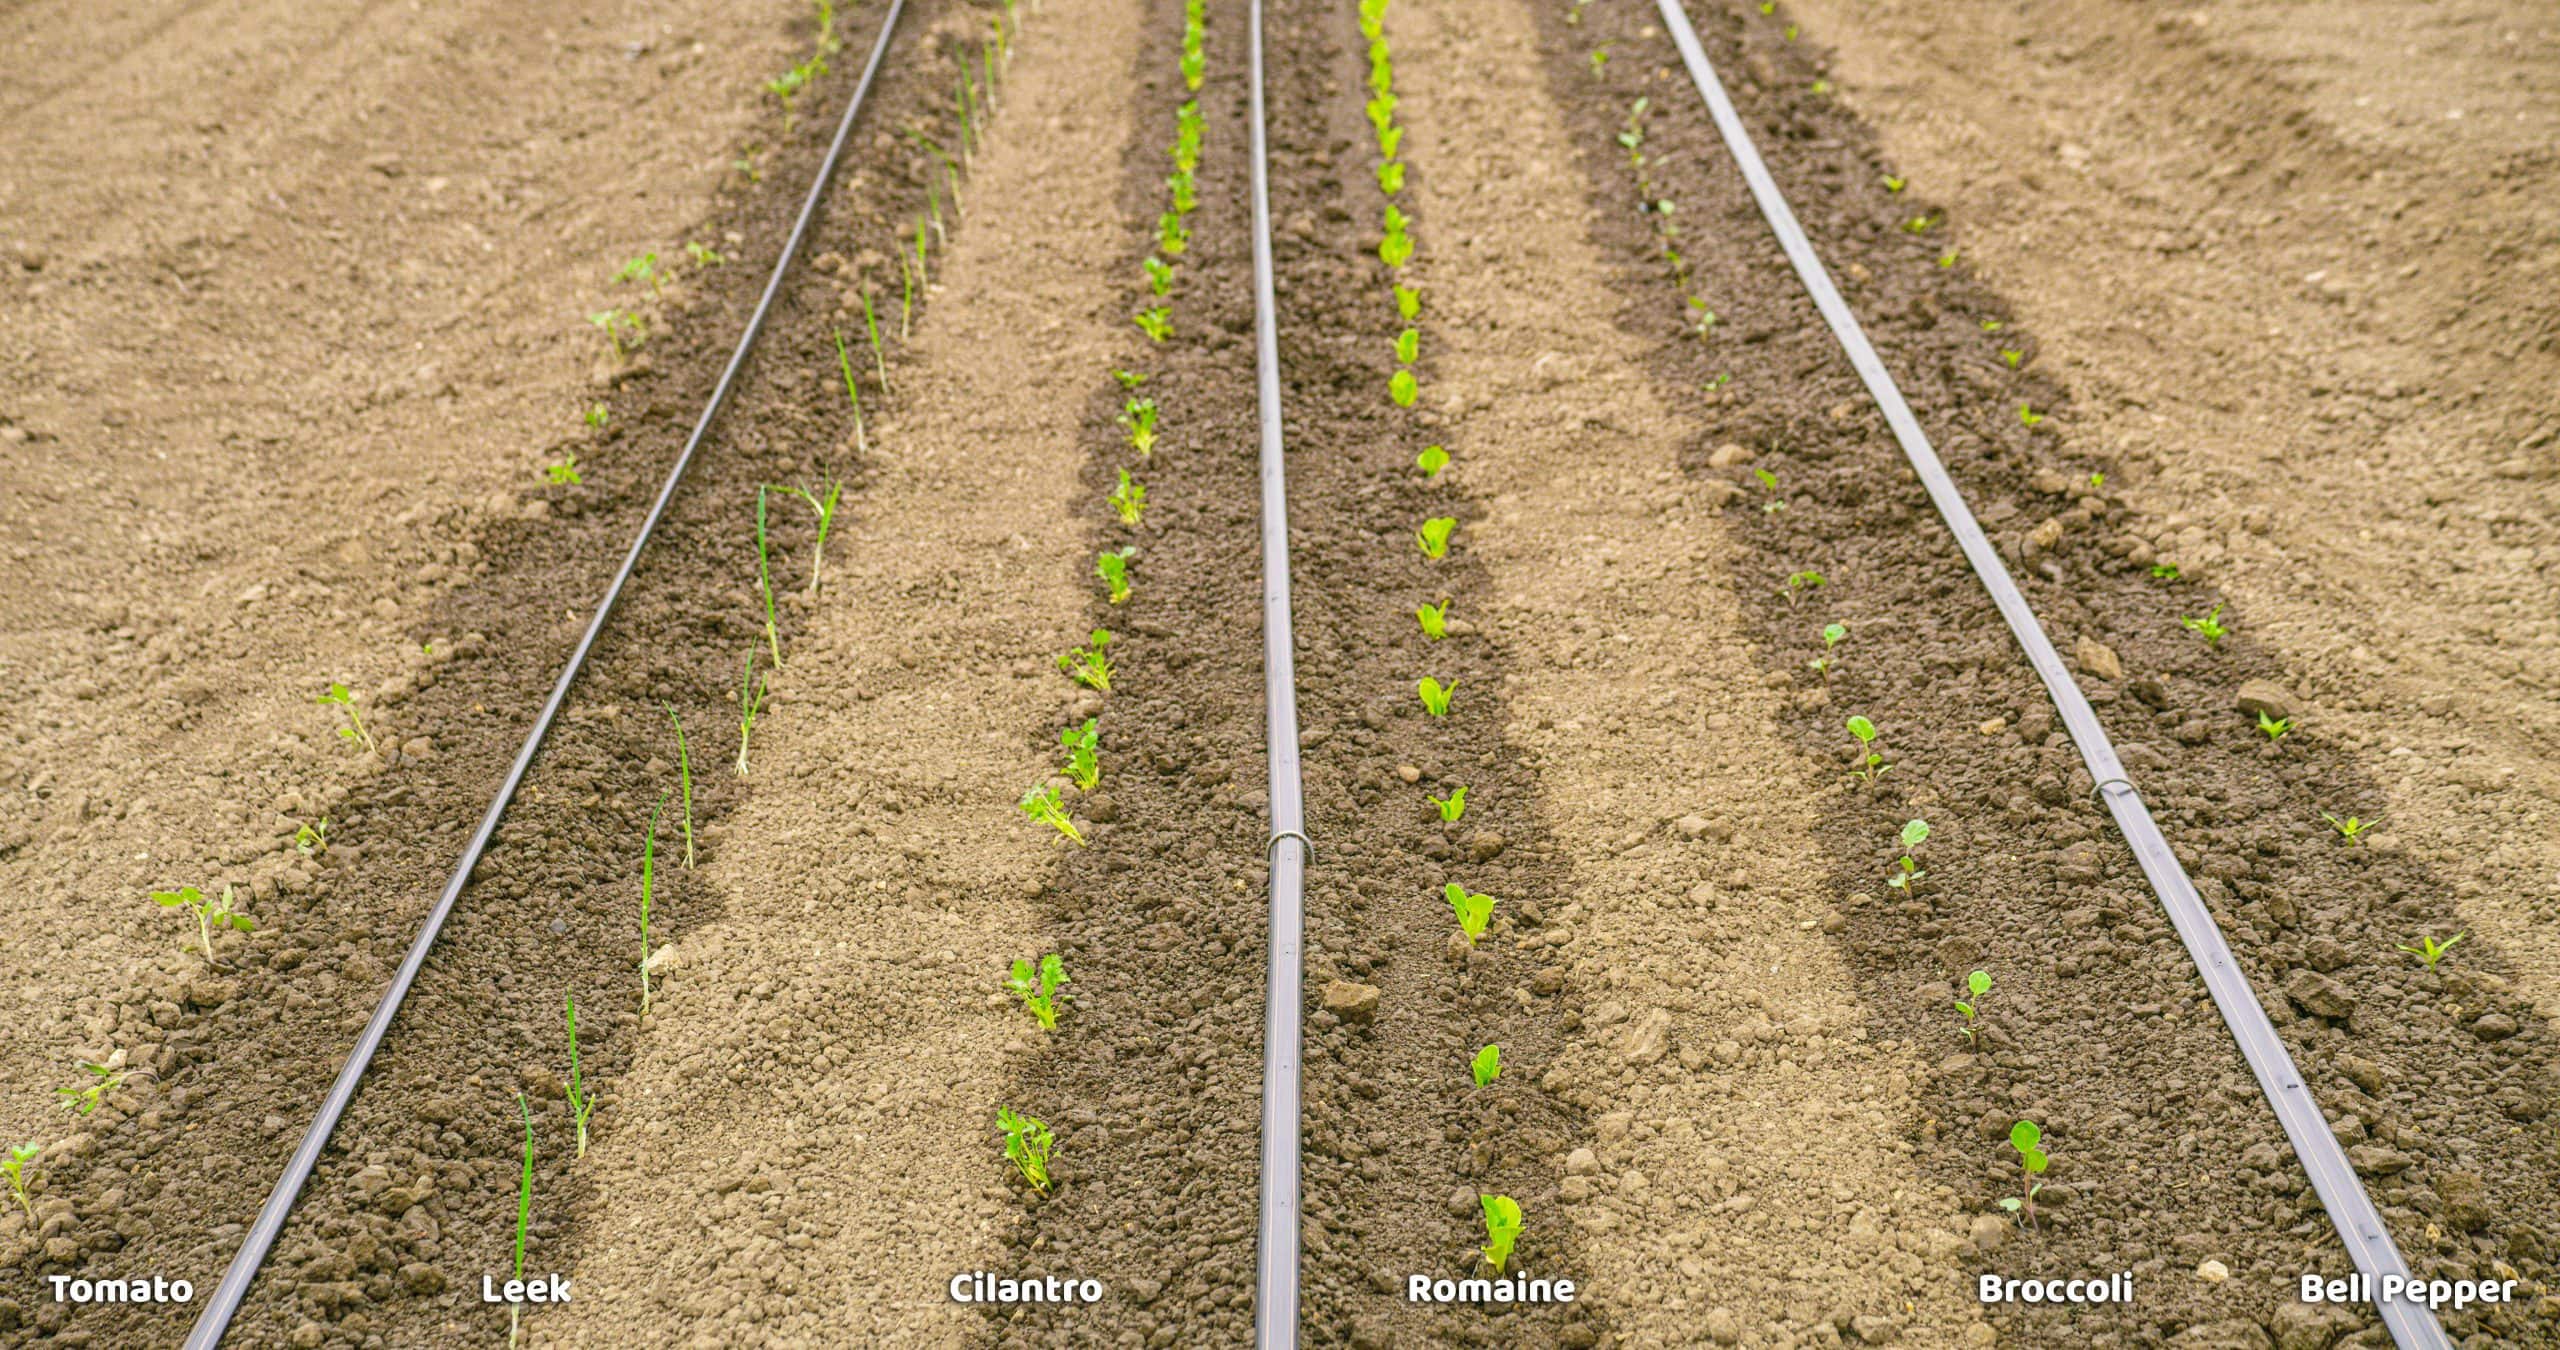 Planting seedlings at any stage: PlantTape offers flexibility to